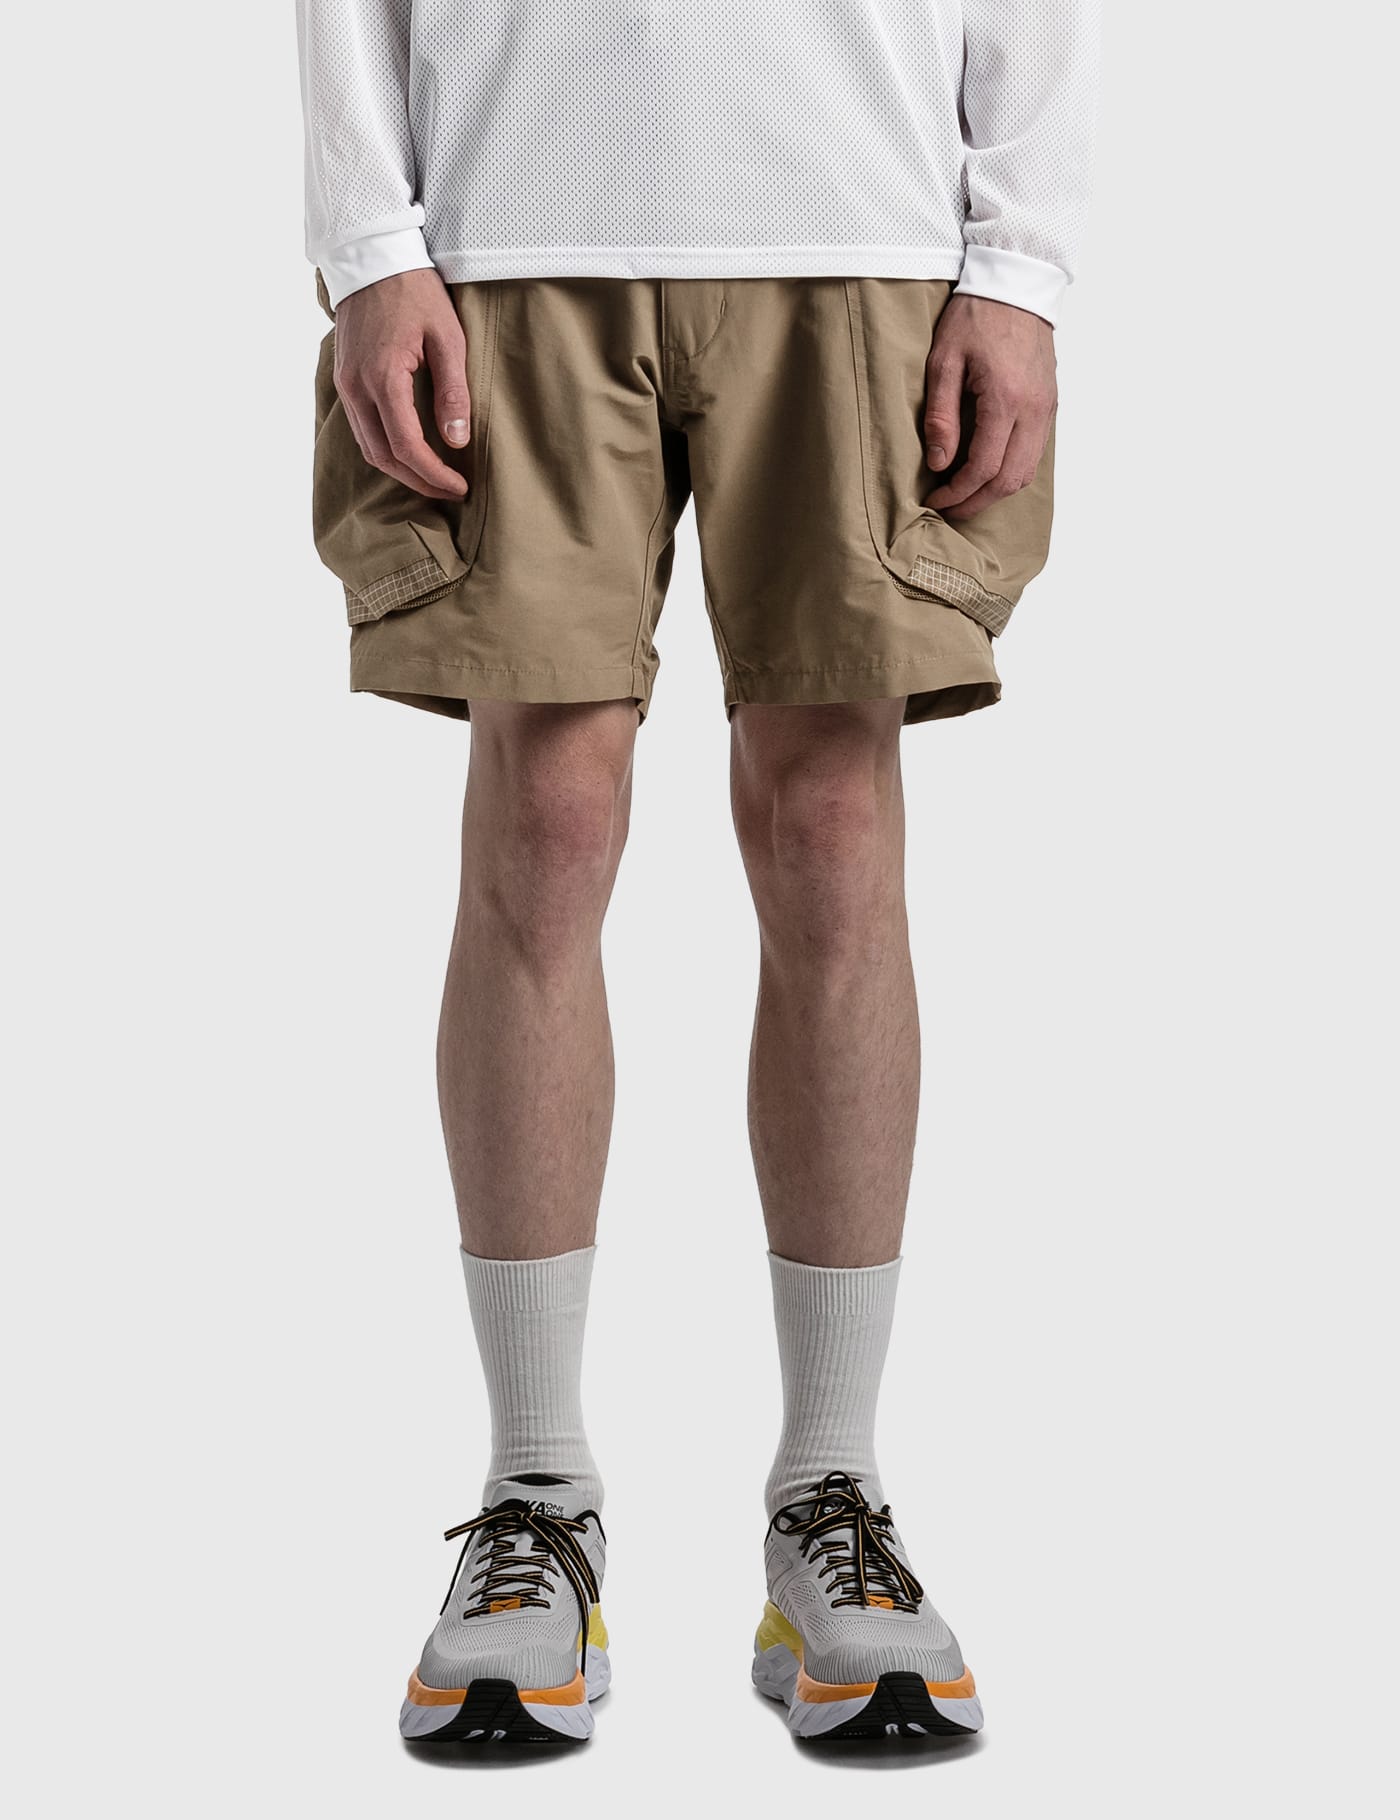 Comfy Outdoor Garment - Activity Shorts | HBX - Globally Curated 